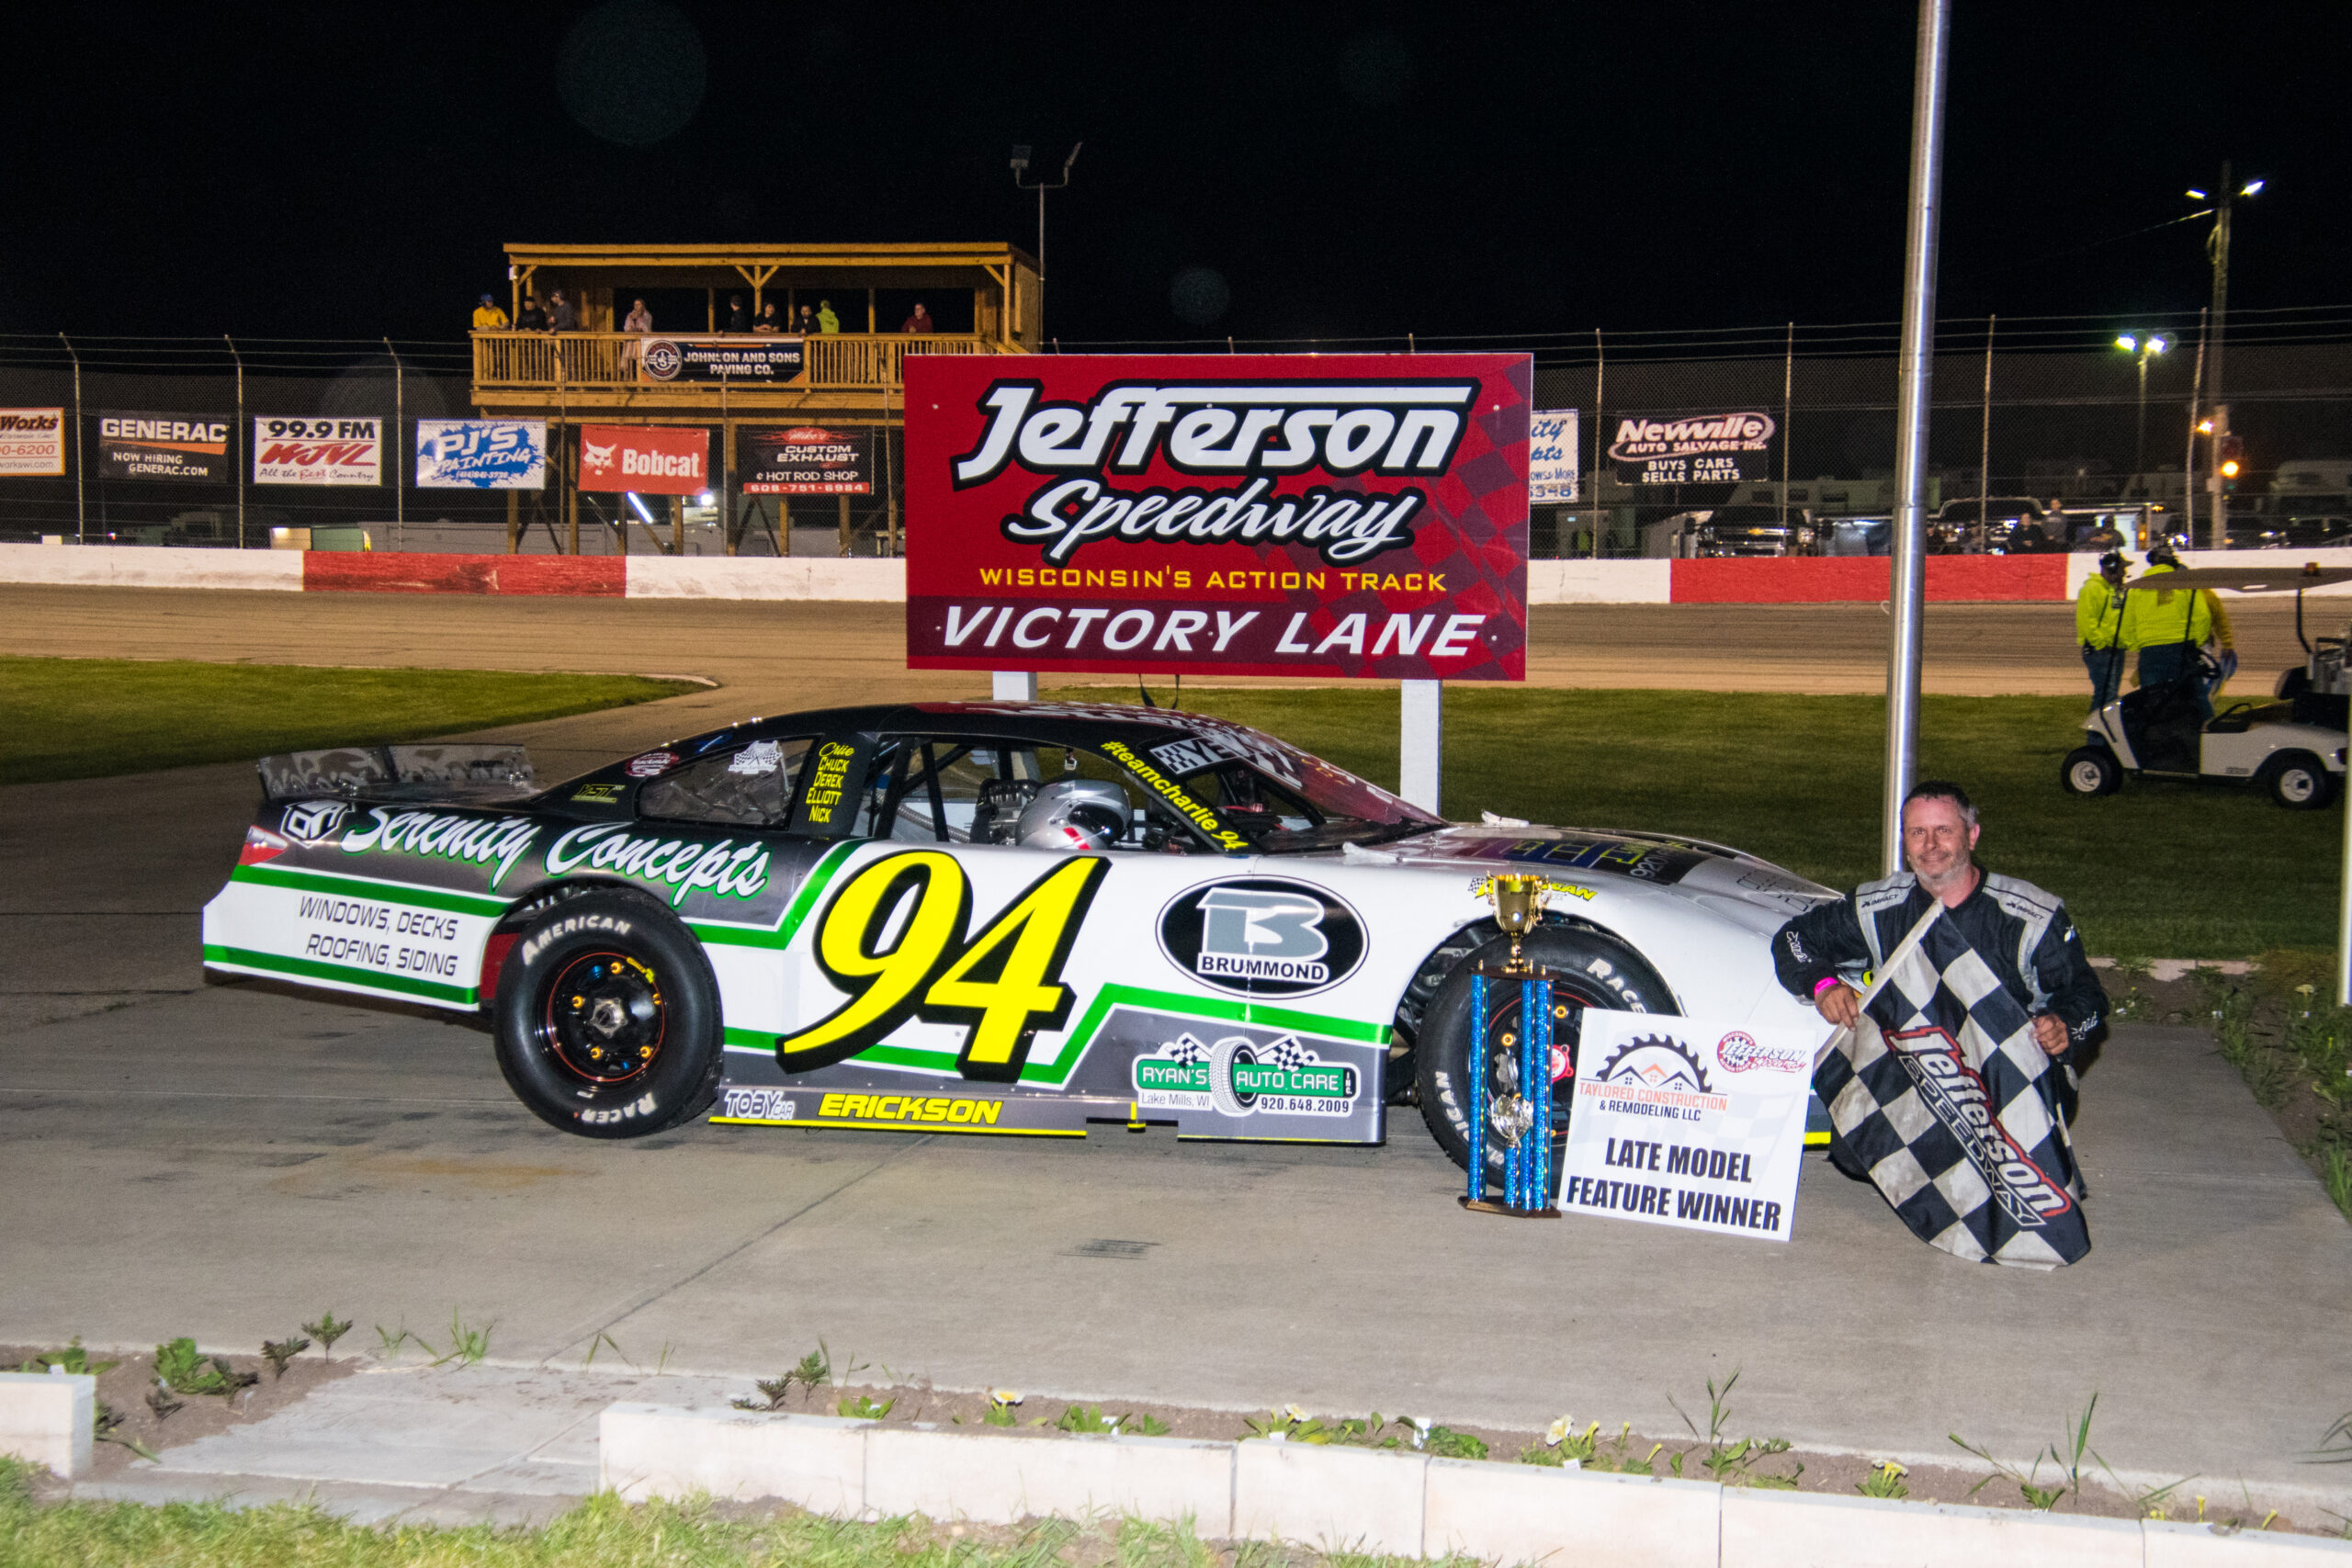 Jason Erickson Has Now Gone 3 For 3 In The Taylored Construction And Remodeling Late Models